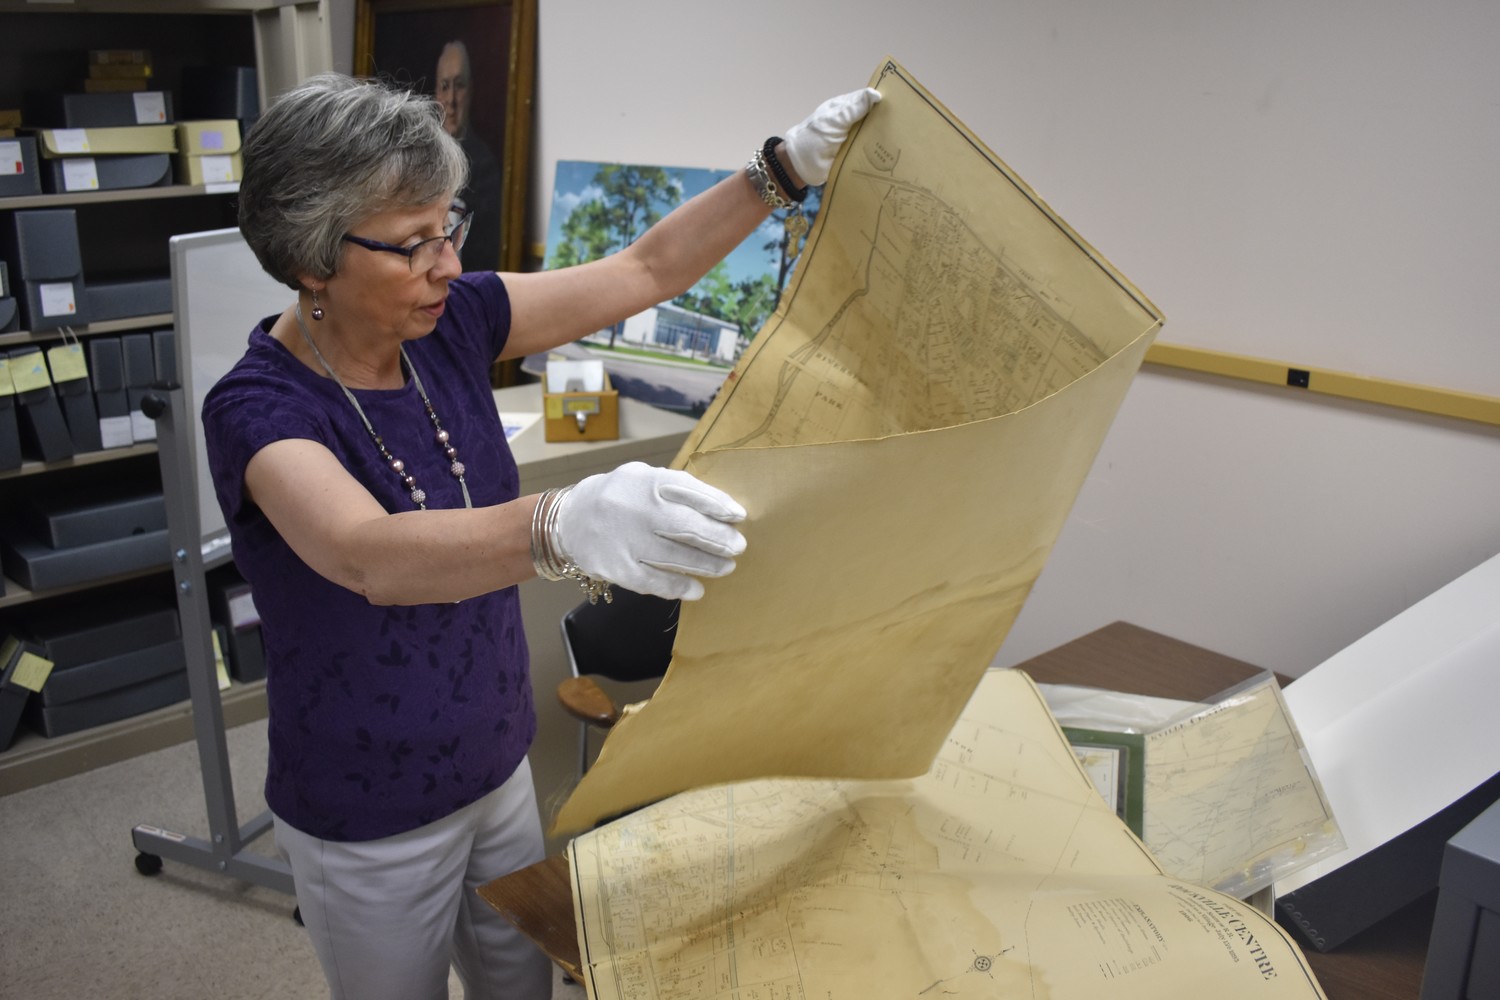 Alene Scoblete, the Rockville Centre Public Library’s archivist and local history librarian, analyzed a 1906 map of Rockville Centre in the facility’s basement.